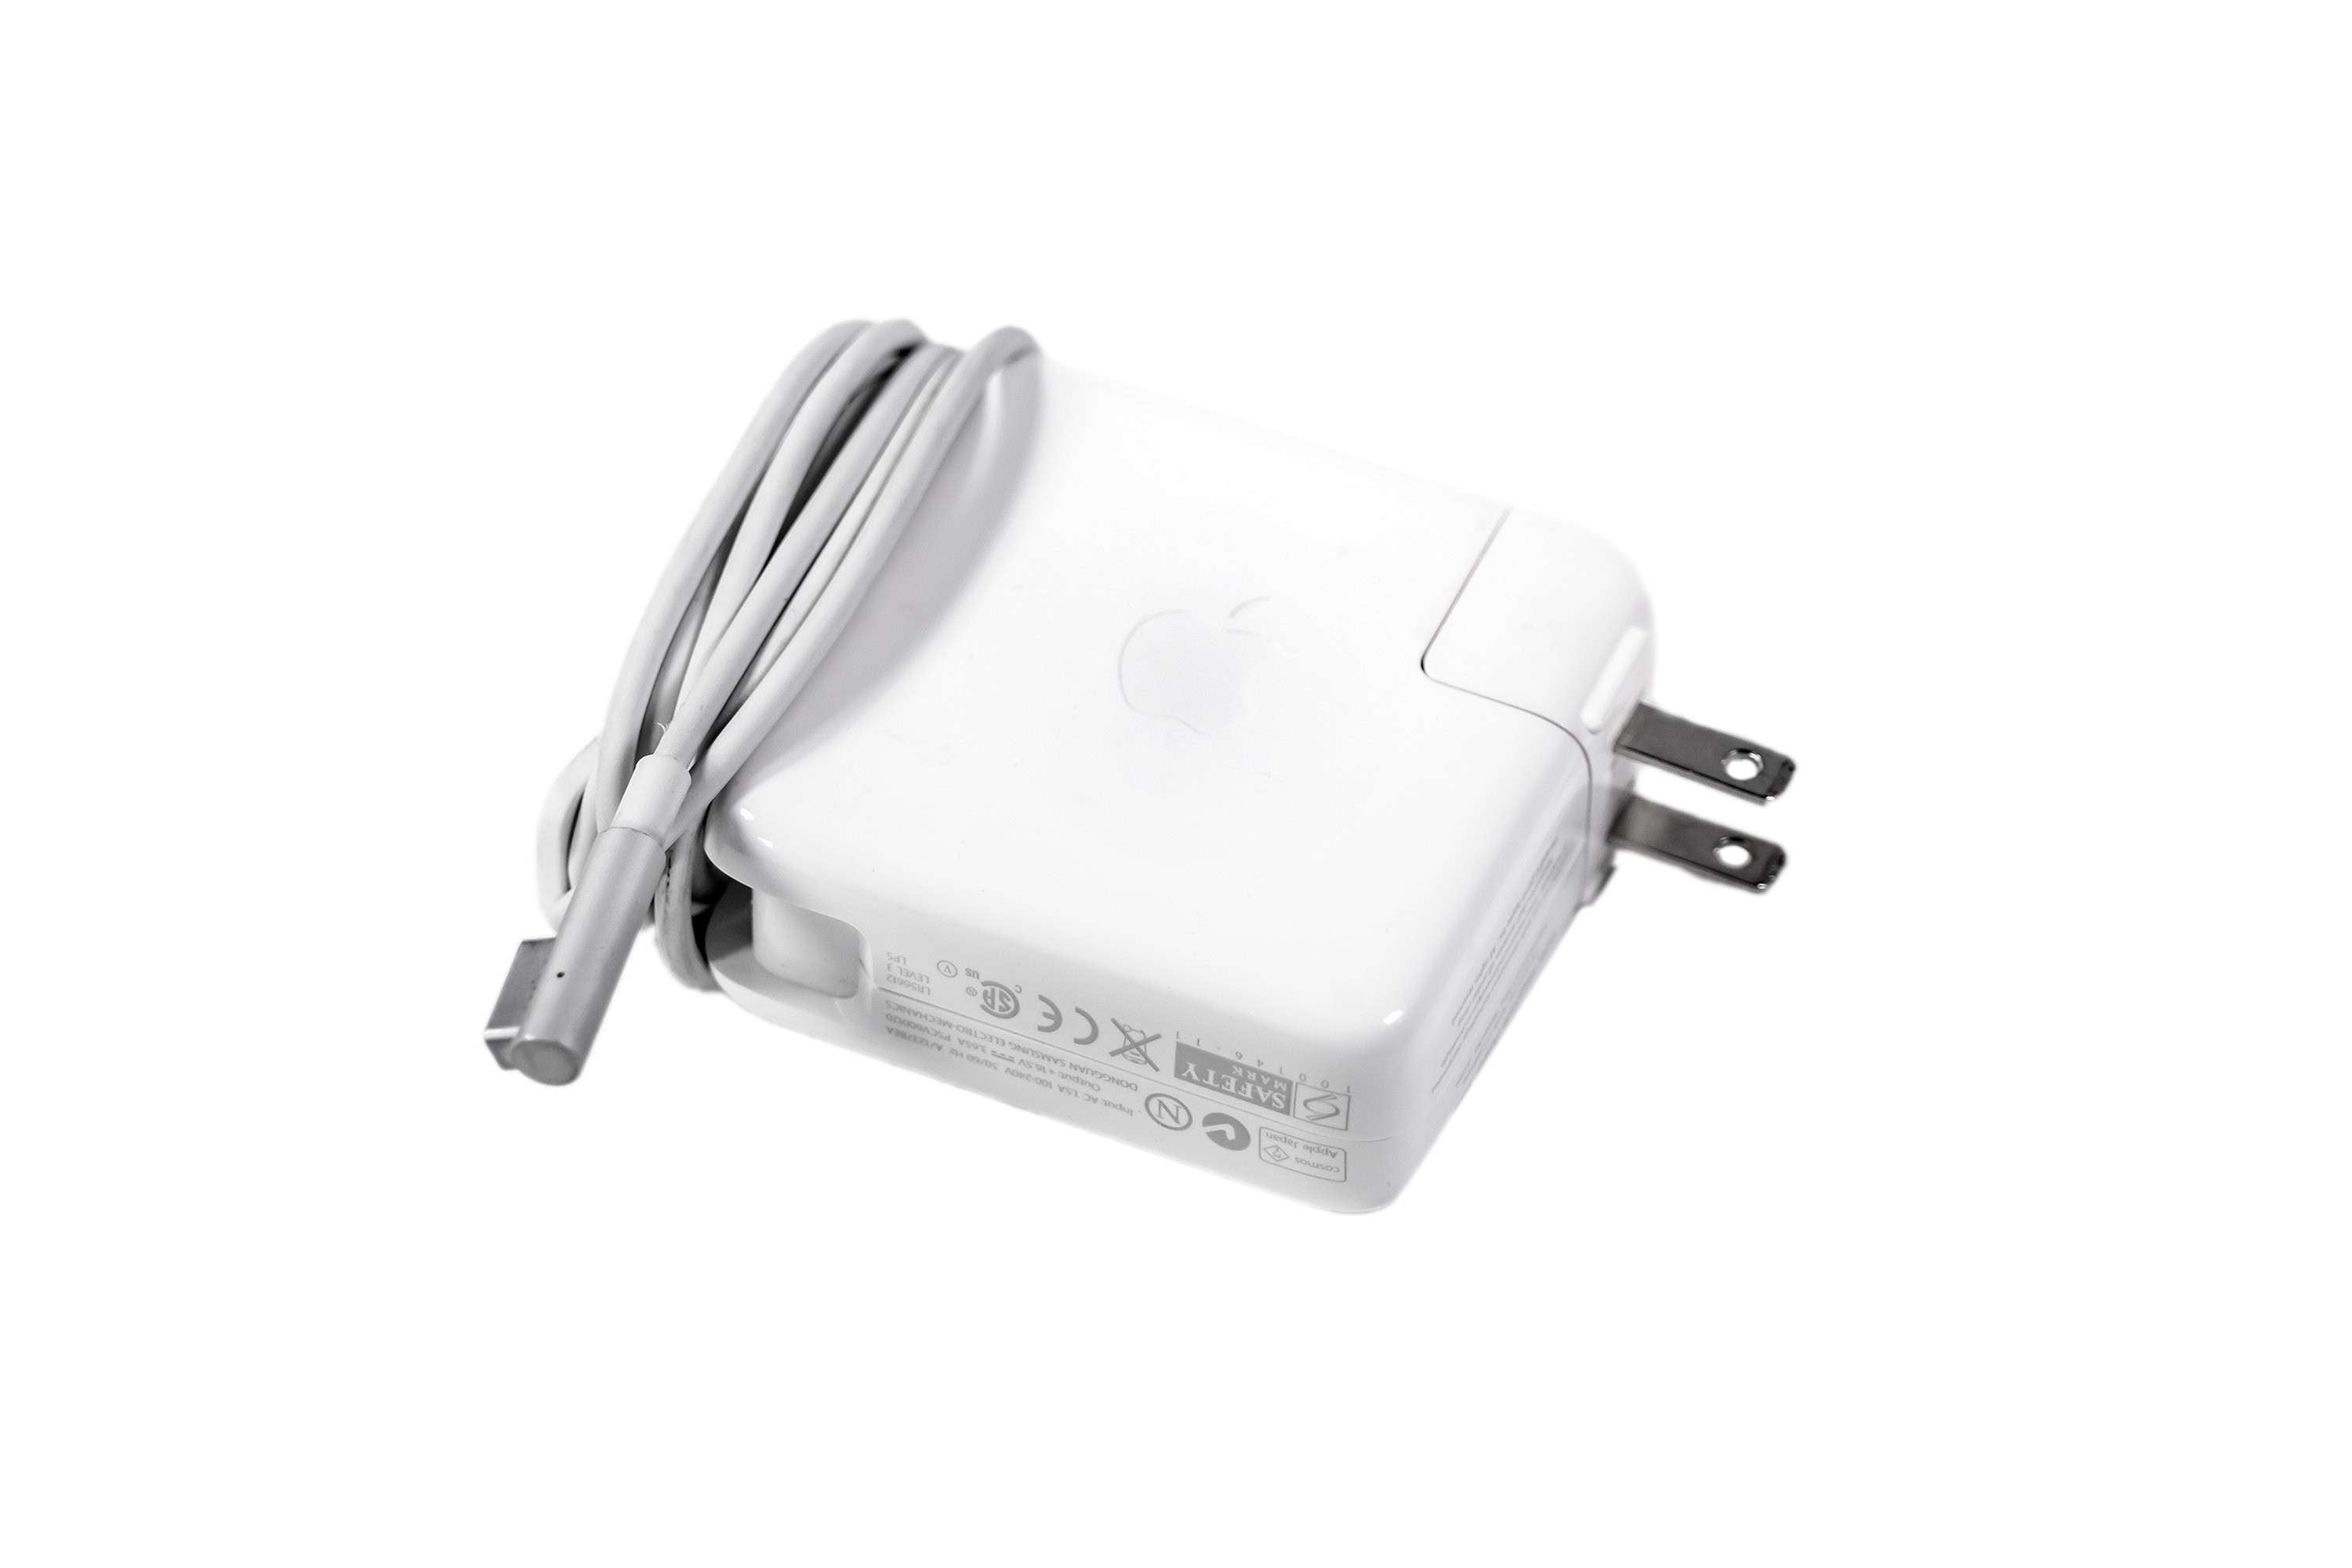 Apple MagSafe 1 Charger 45w for Macbook Air w/ 6 foot extension